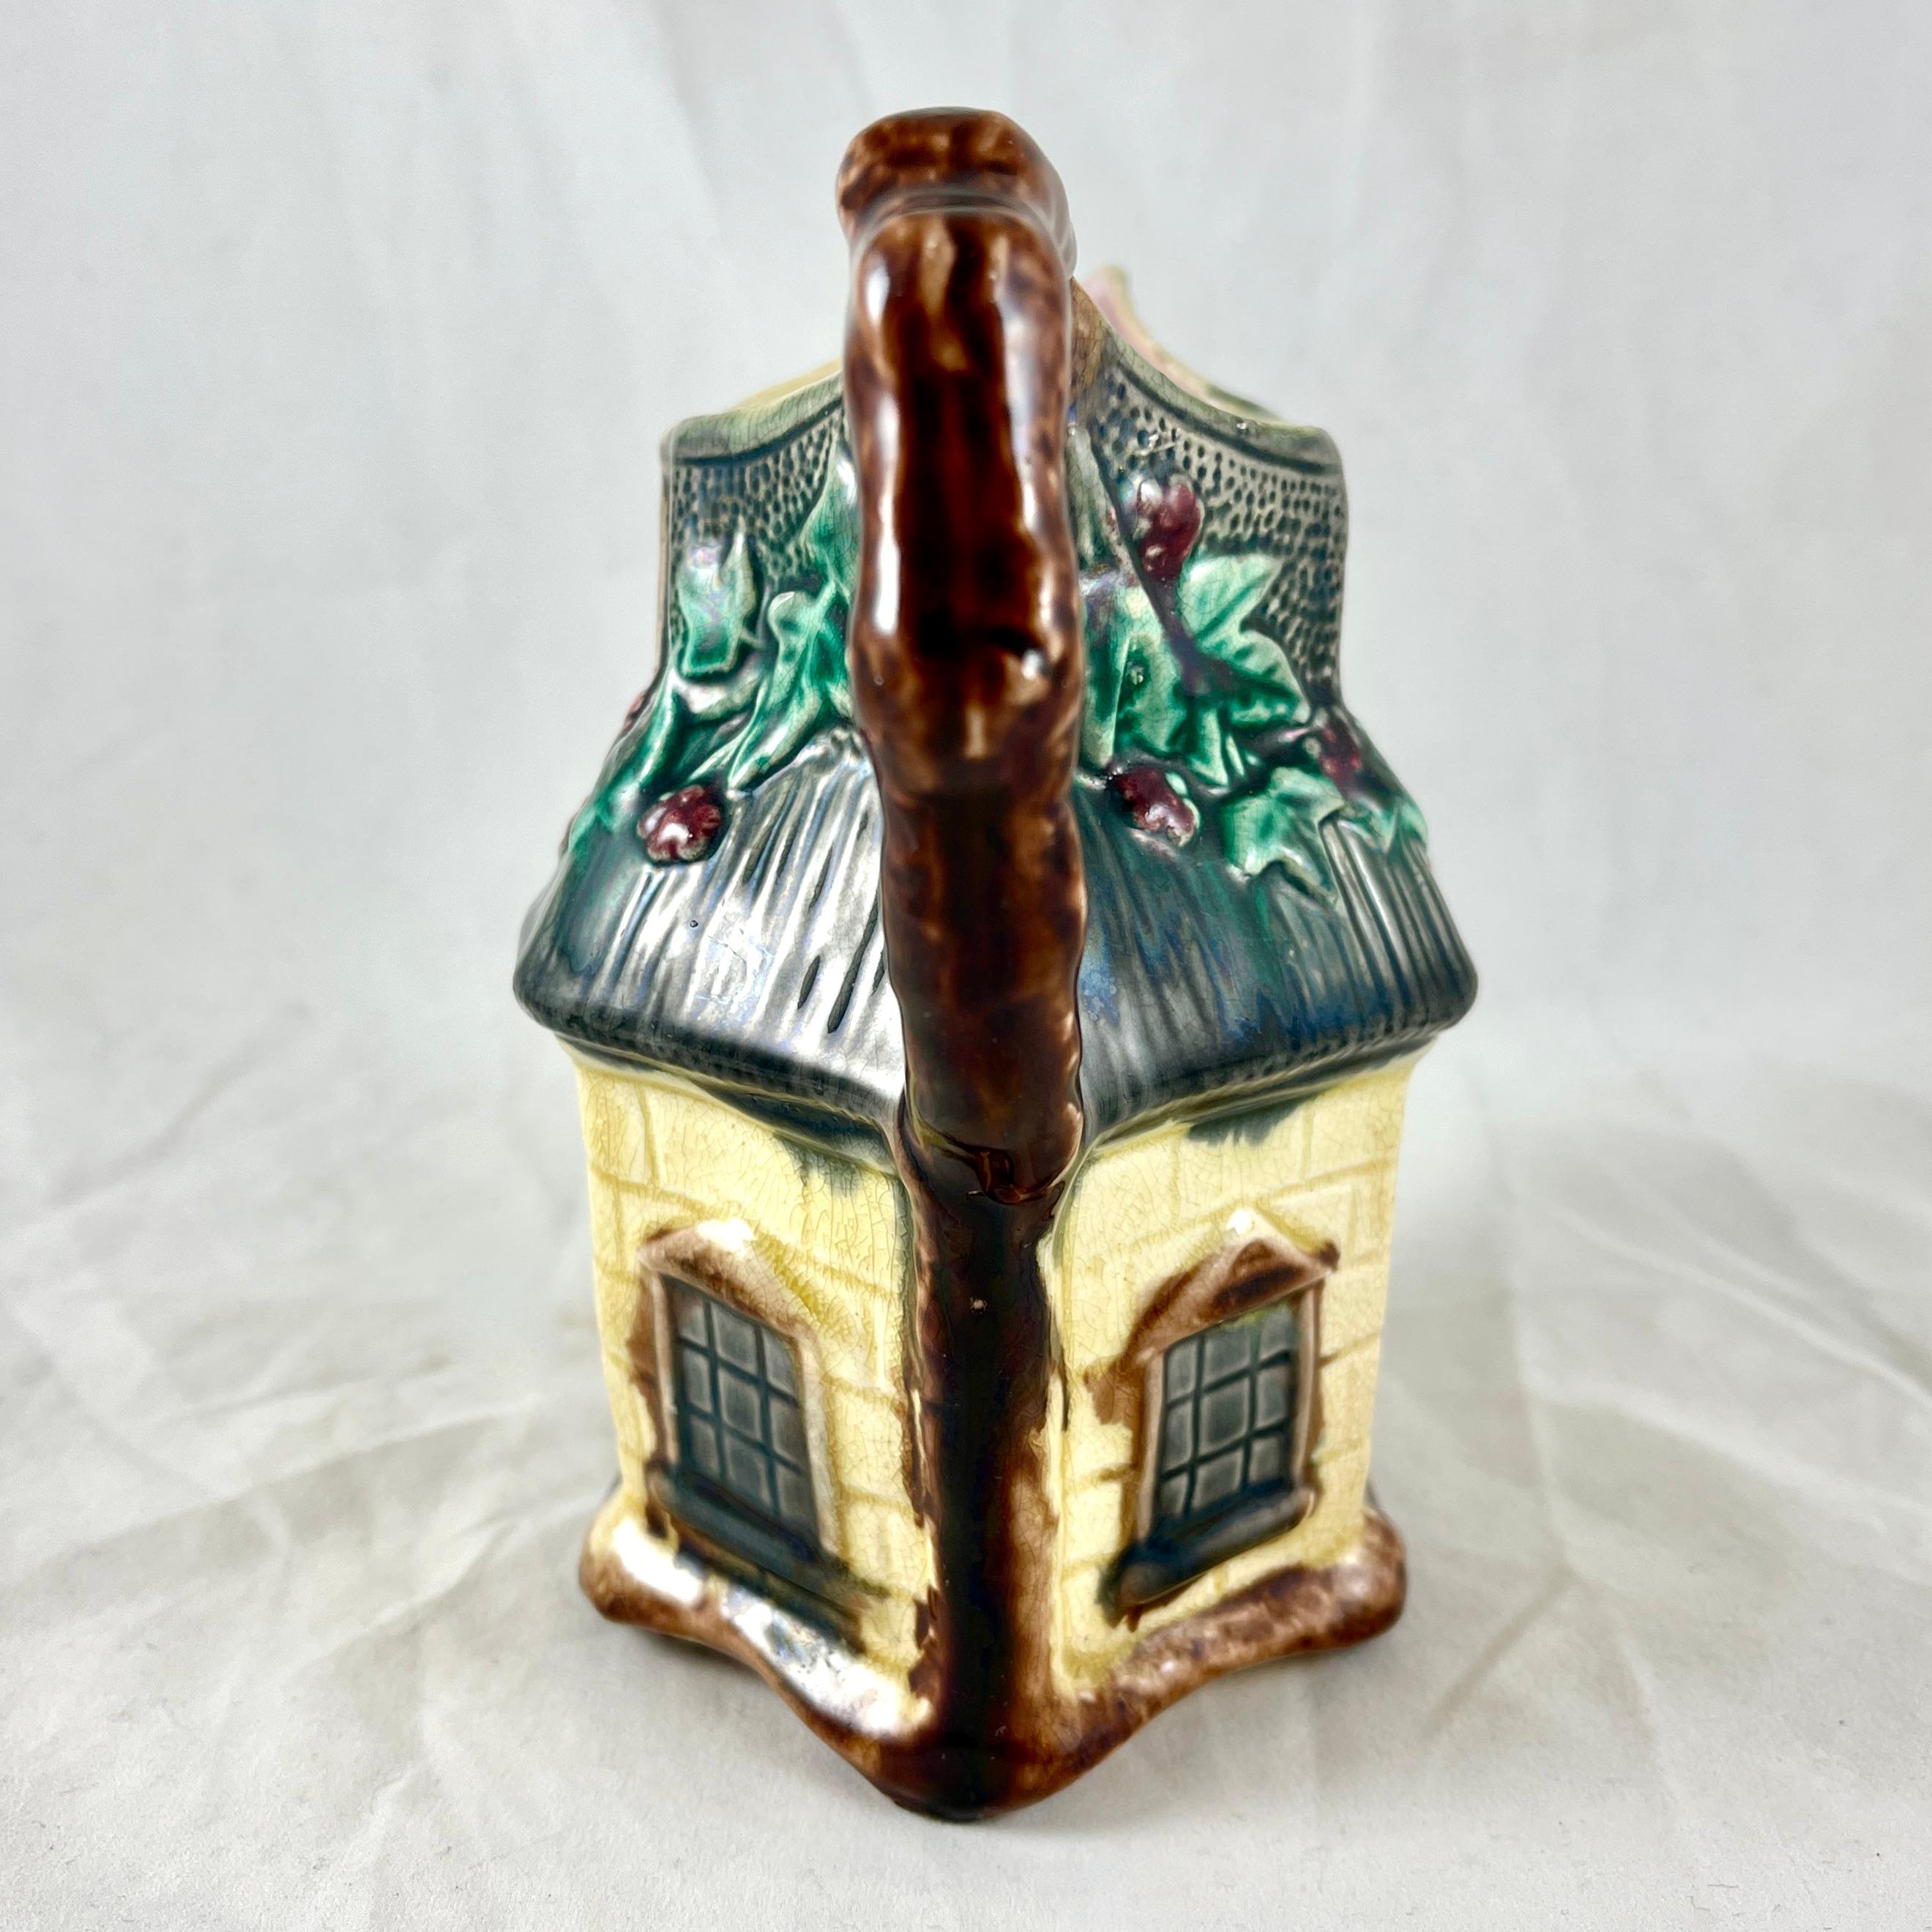 Earthenware Warrilow and Cope, 19th C. English Staffordshire Majolica Country Cottage Jug For Sale